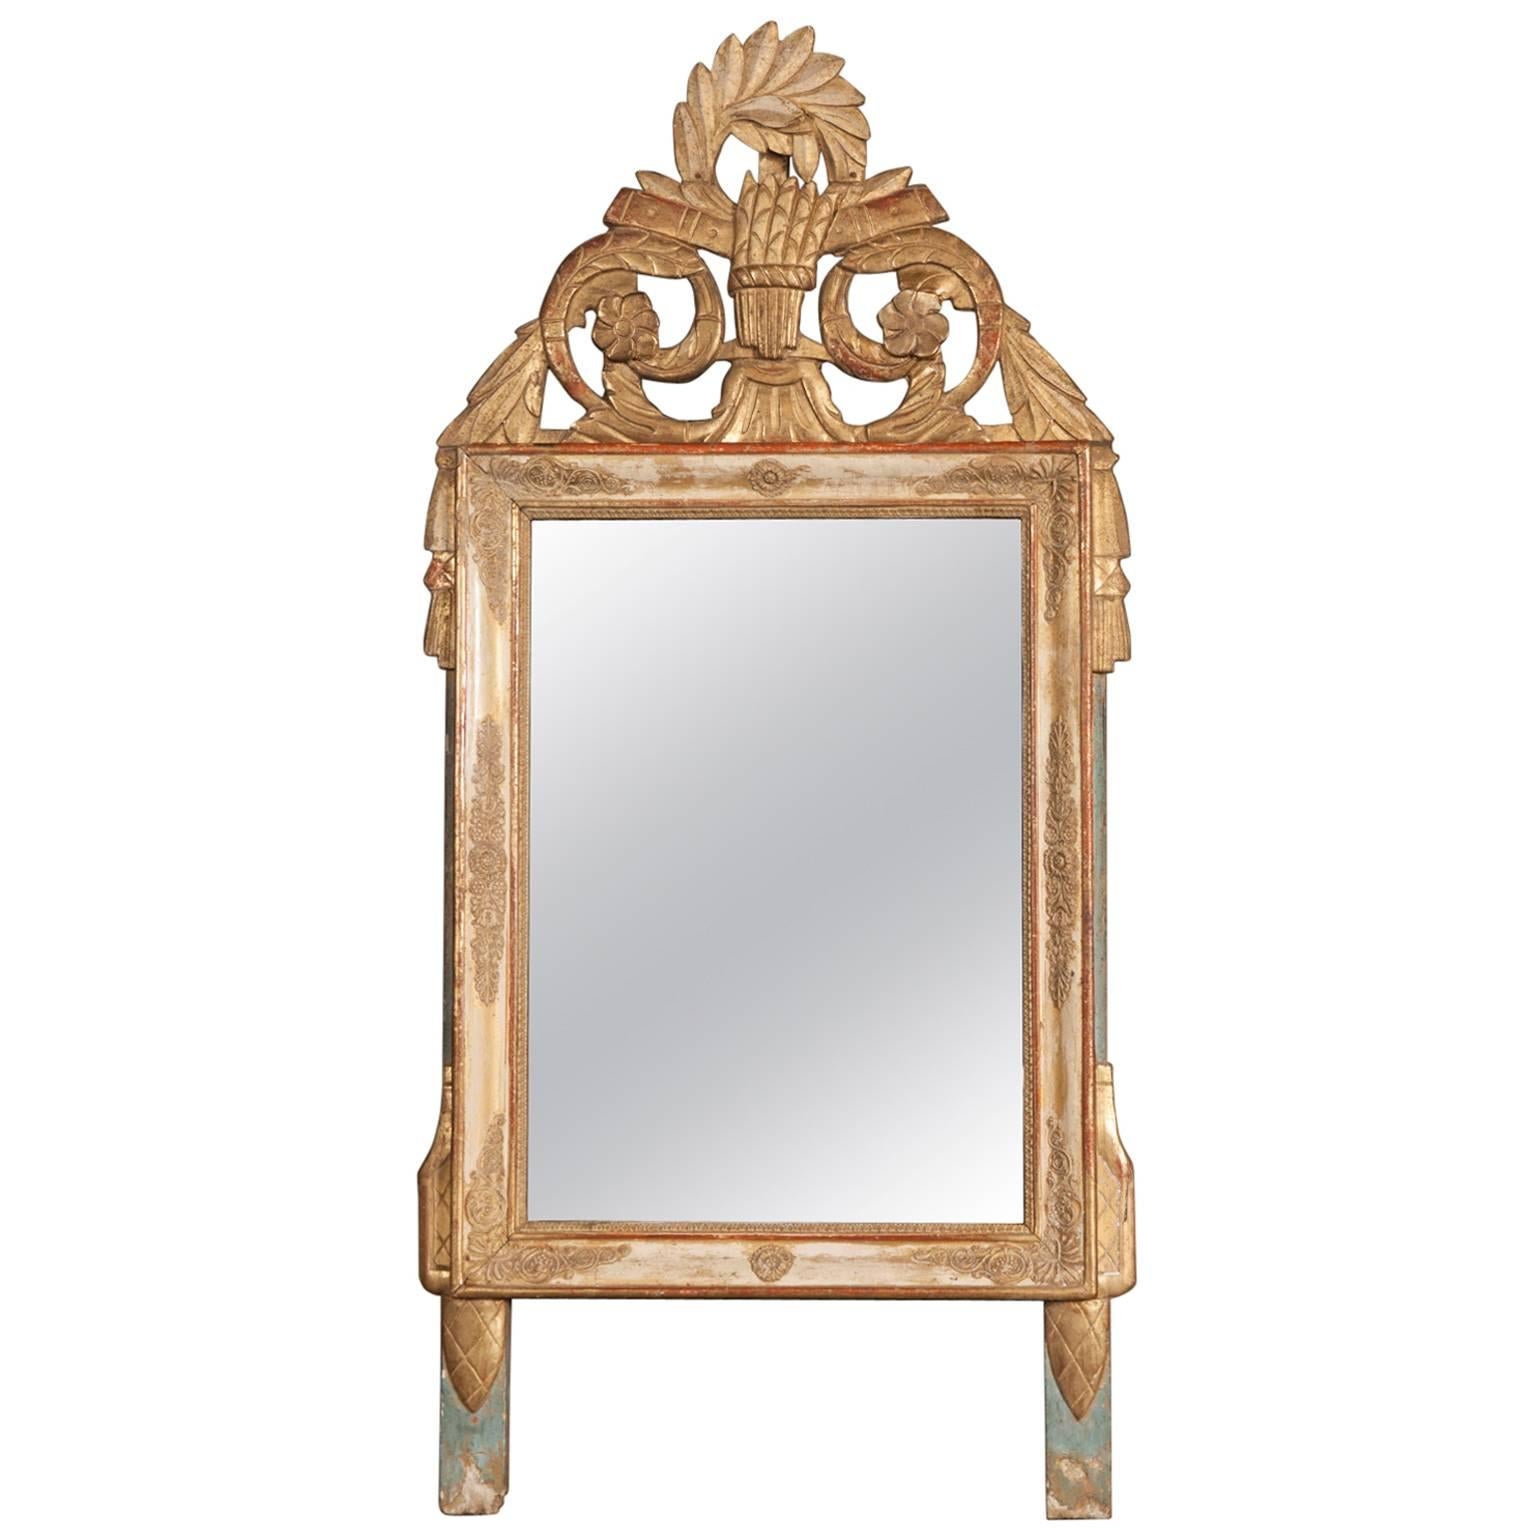 Gold Leaf Painted and Carved Mirror, Early 19th Century French, Louis XVI For Sale